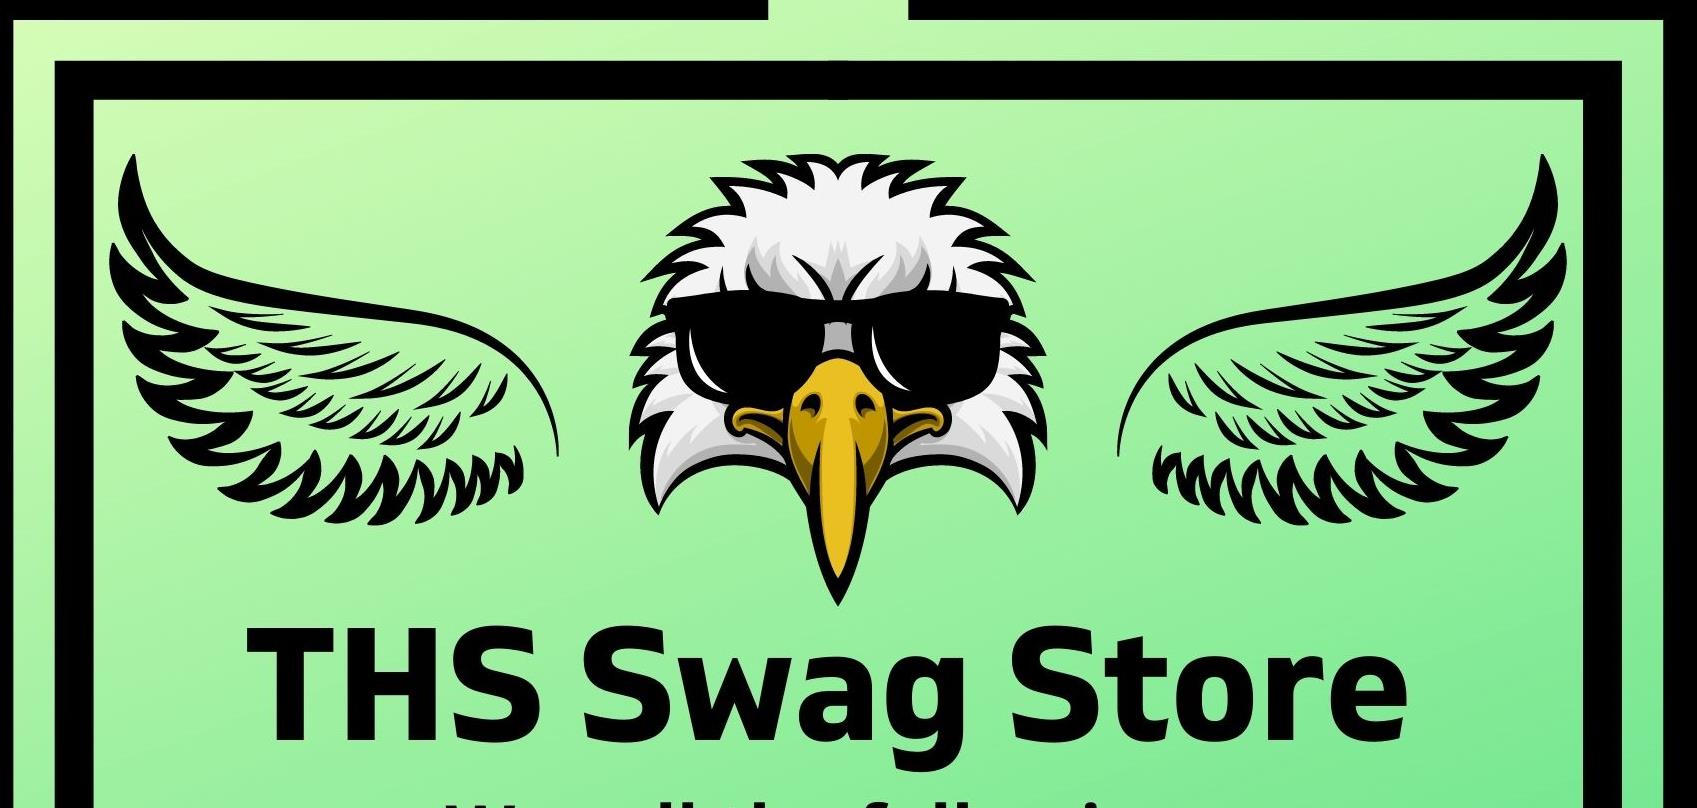 THS Swag Store